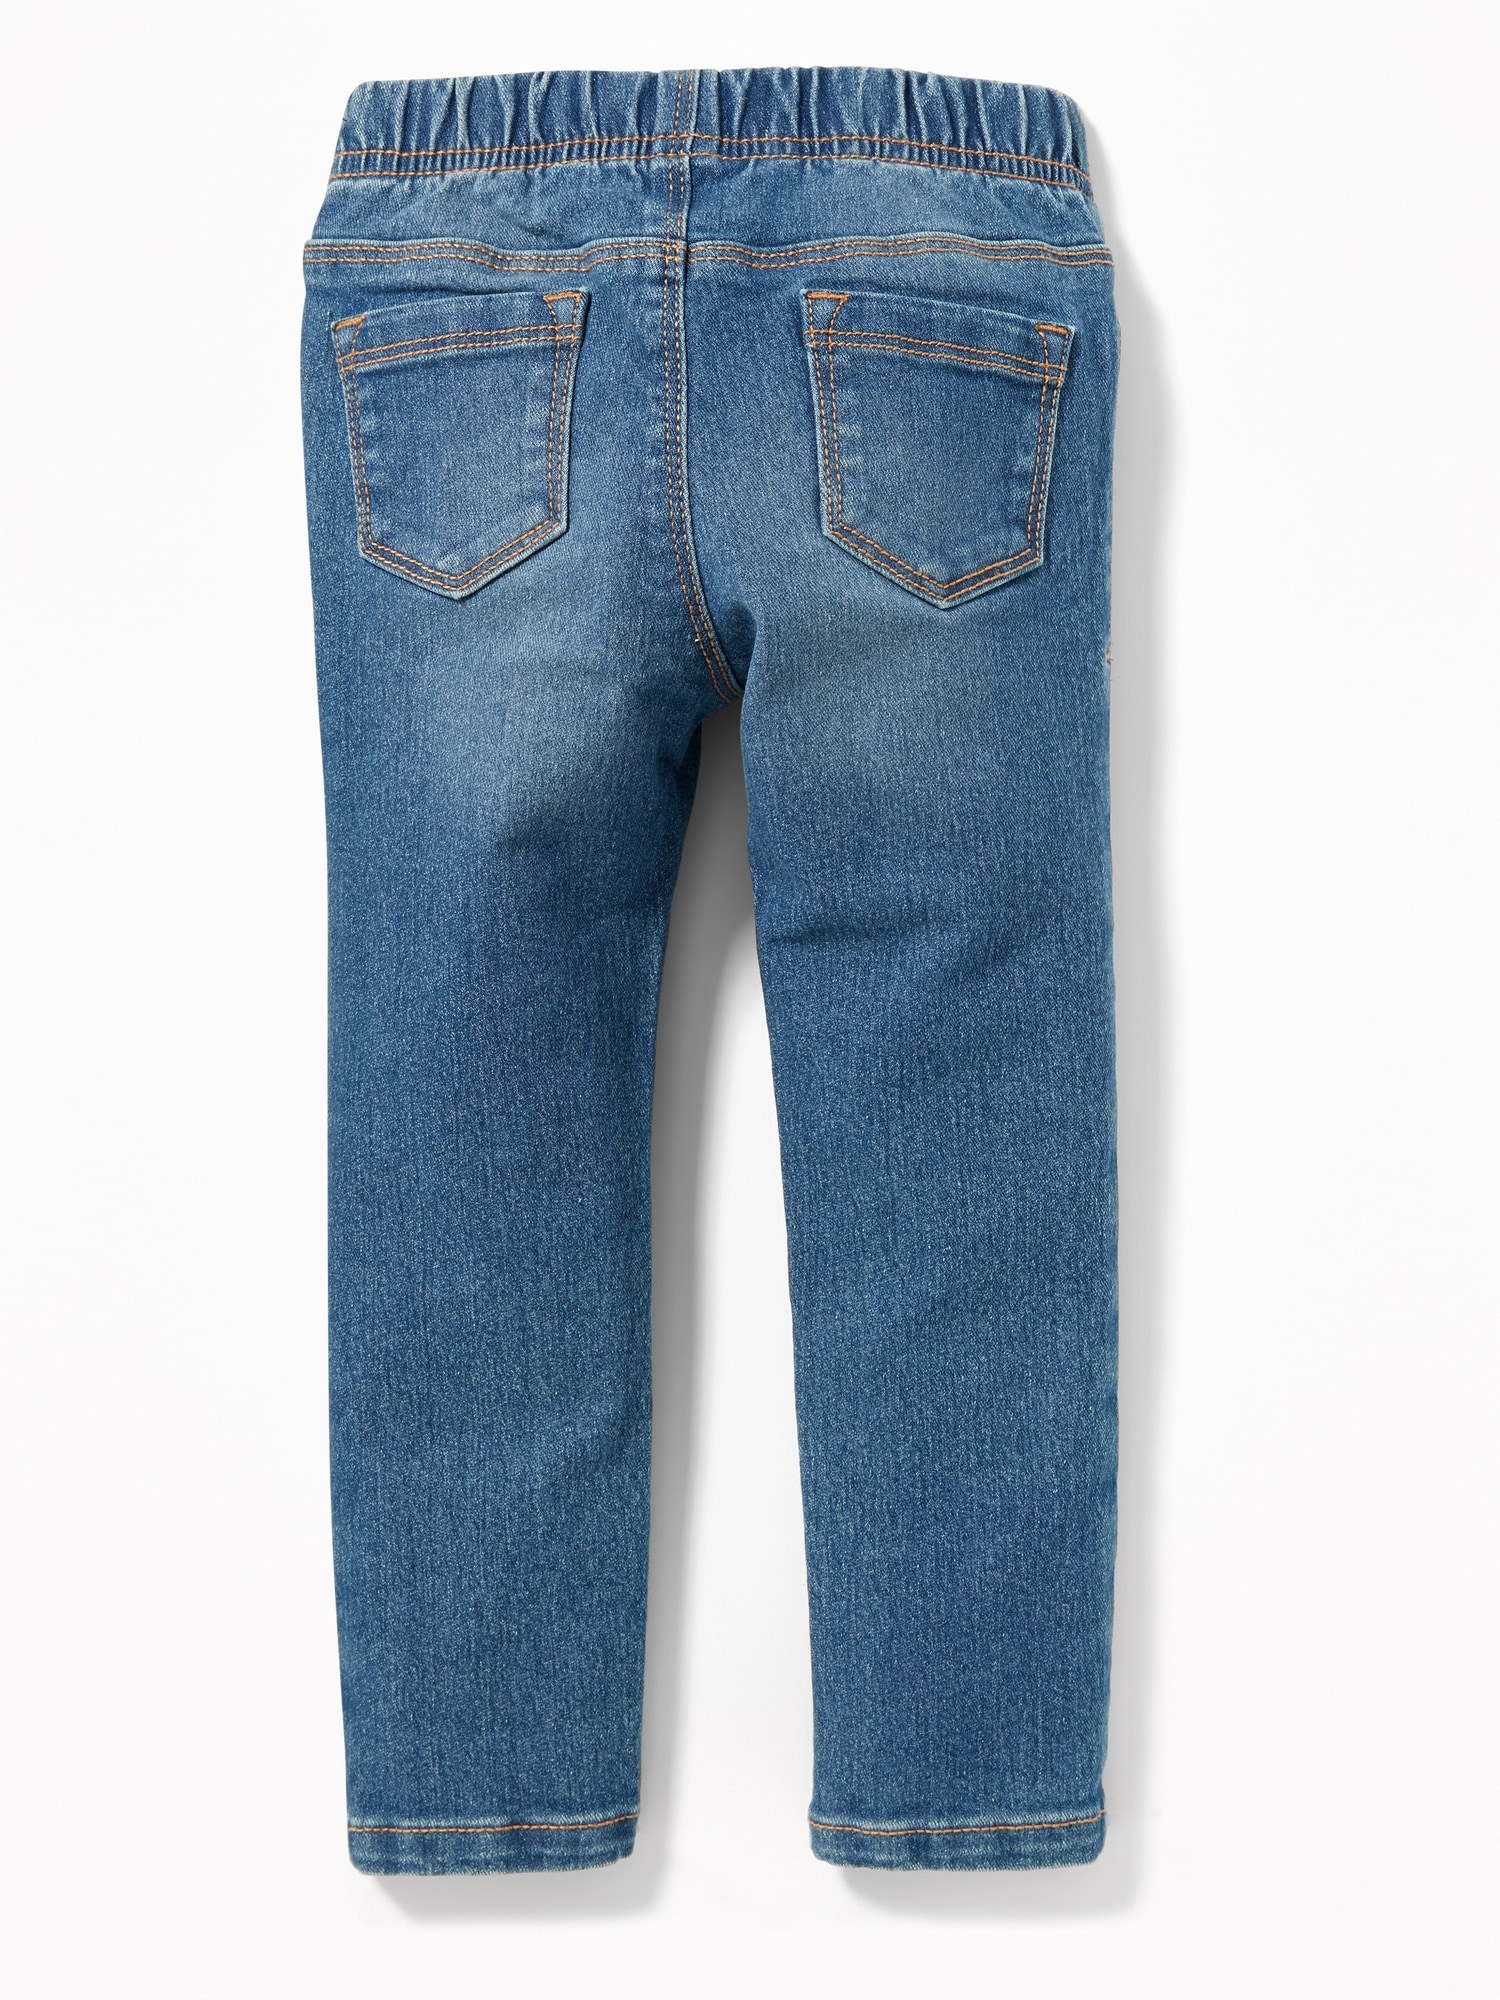 old navy girls jeans